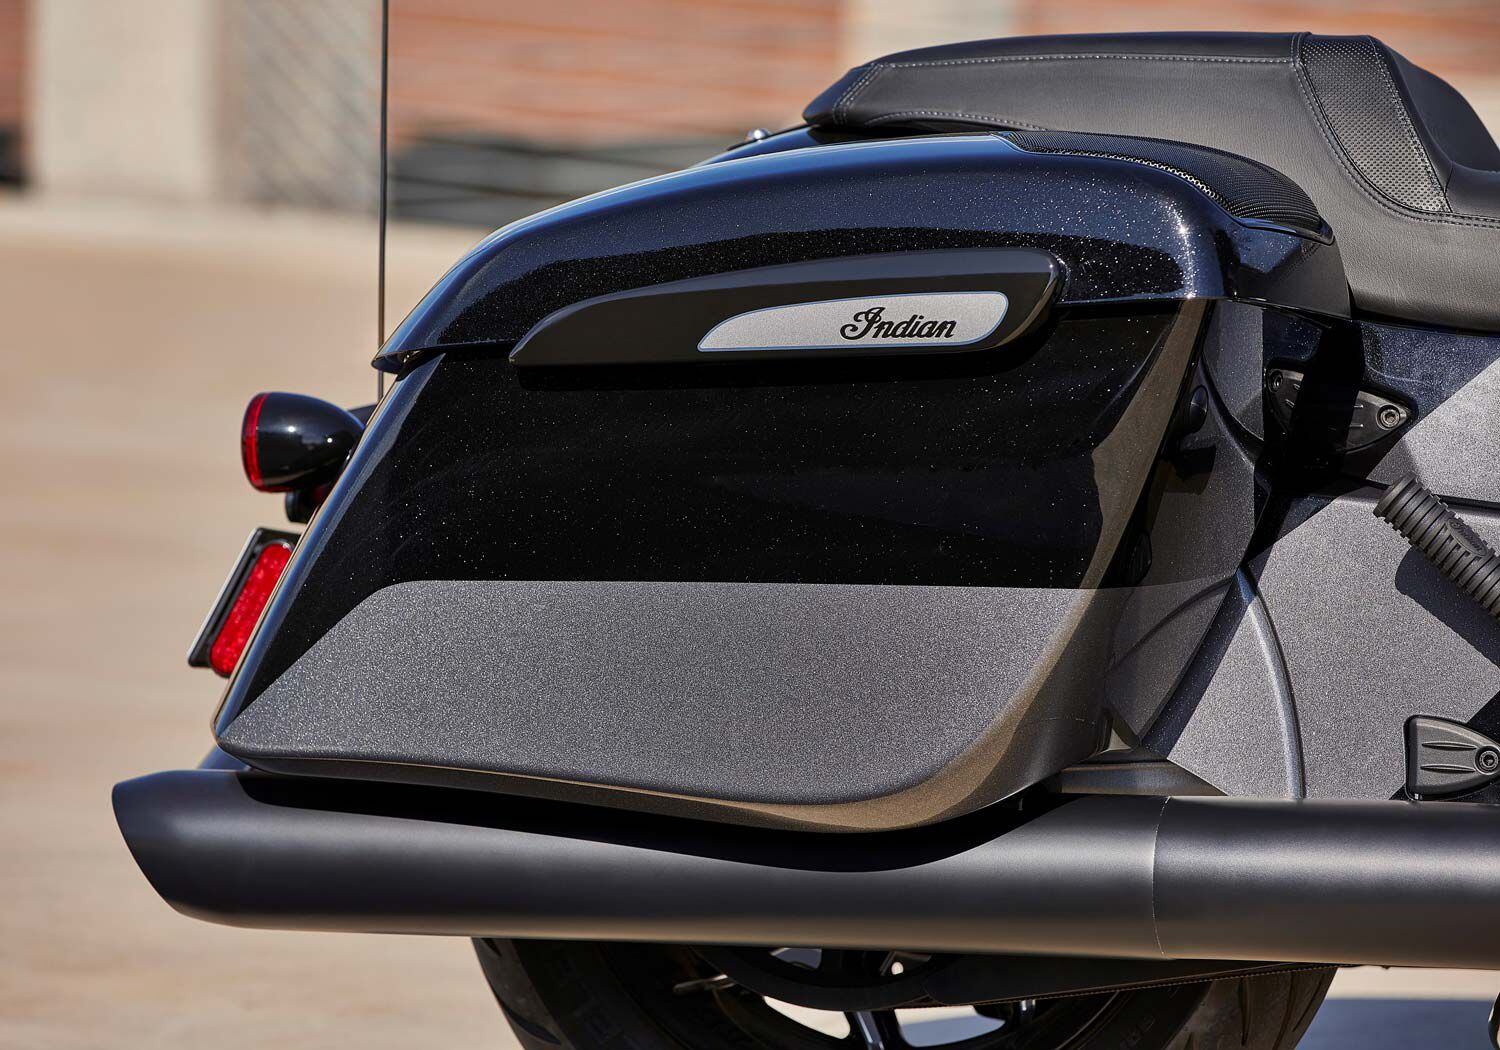 Lockable and weatherproof saddlebags give you 18 gallons of capacity.